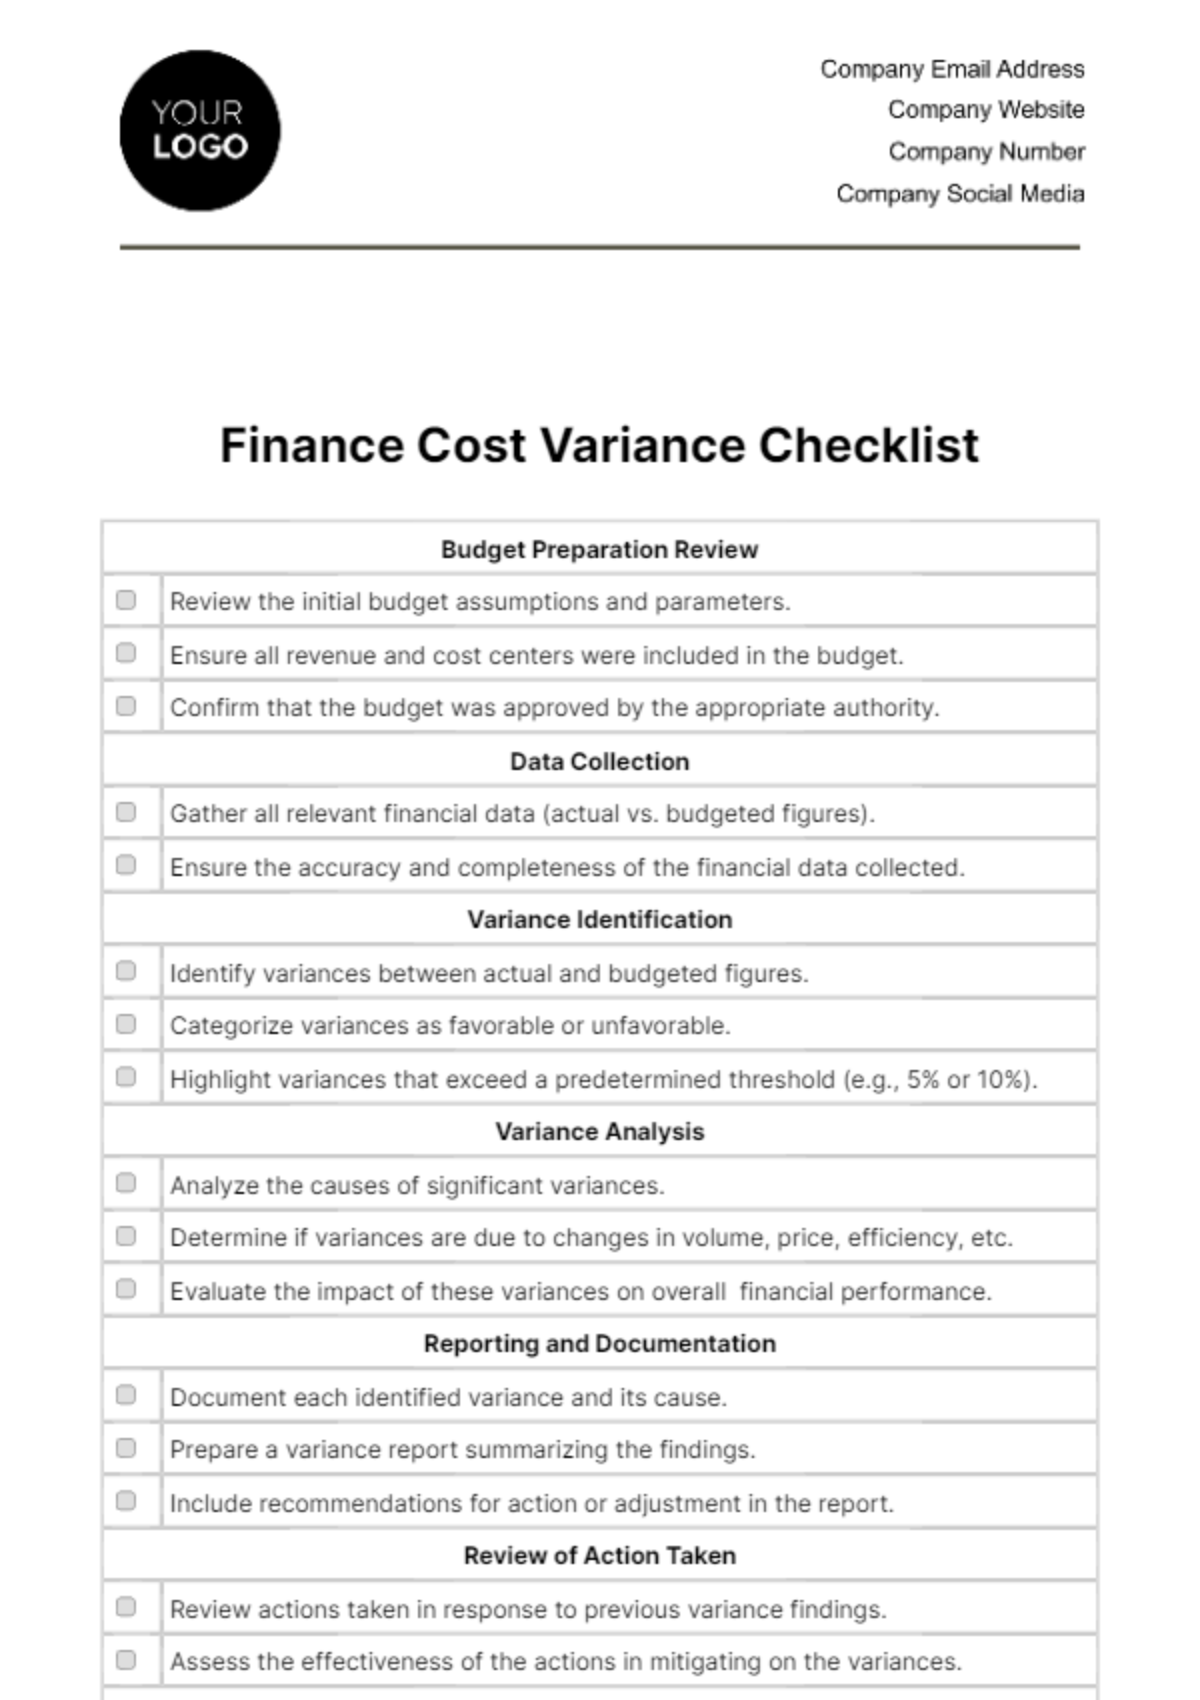 Financial Cost Variance Checklist Template